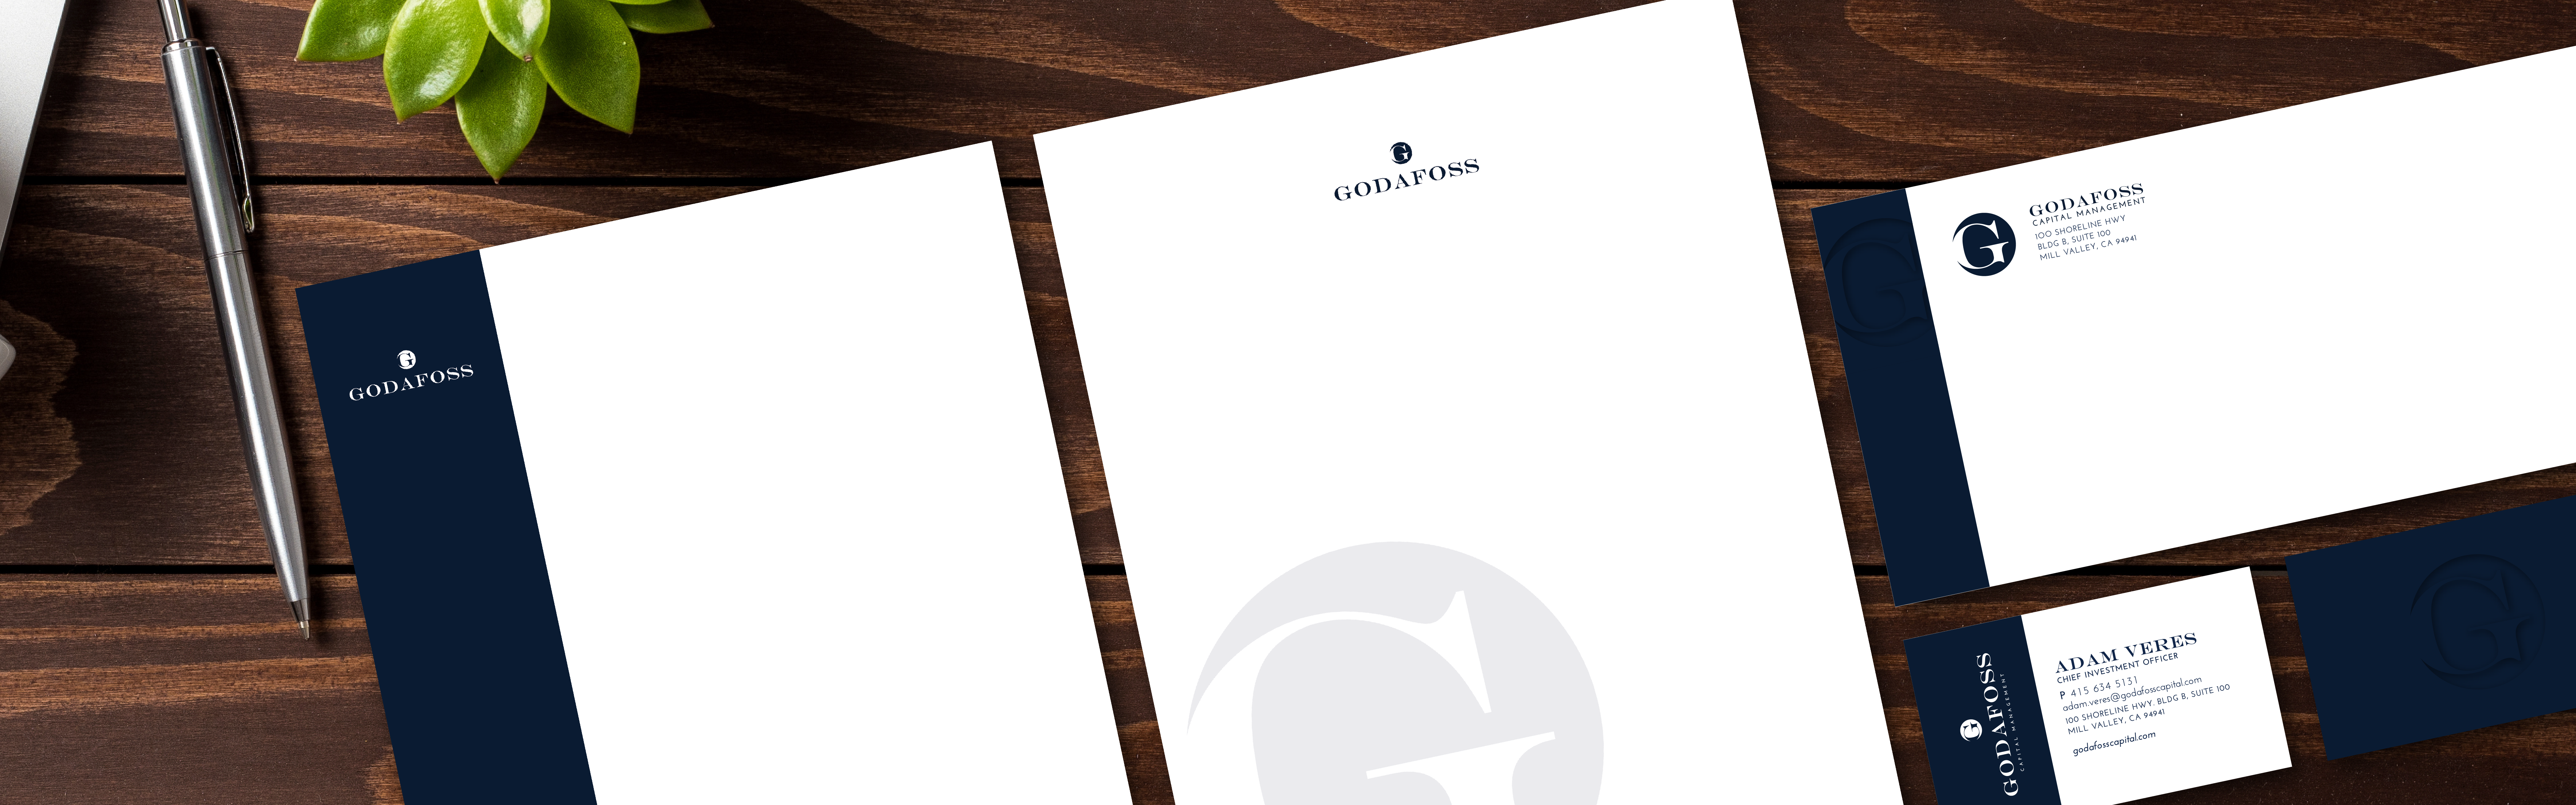 Corporate stationery set for Godafoss Capital Management including letterhead, business cards, and envelopes placed neatly on a wooden desk surface with a pen and a decorative plant.